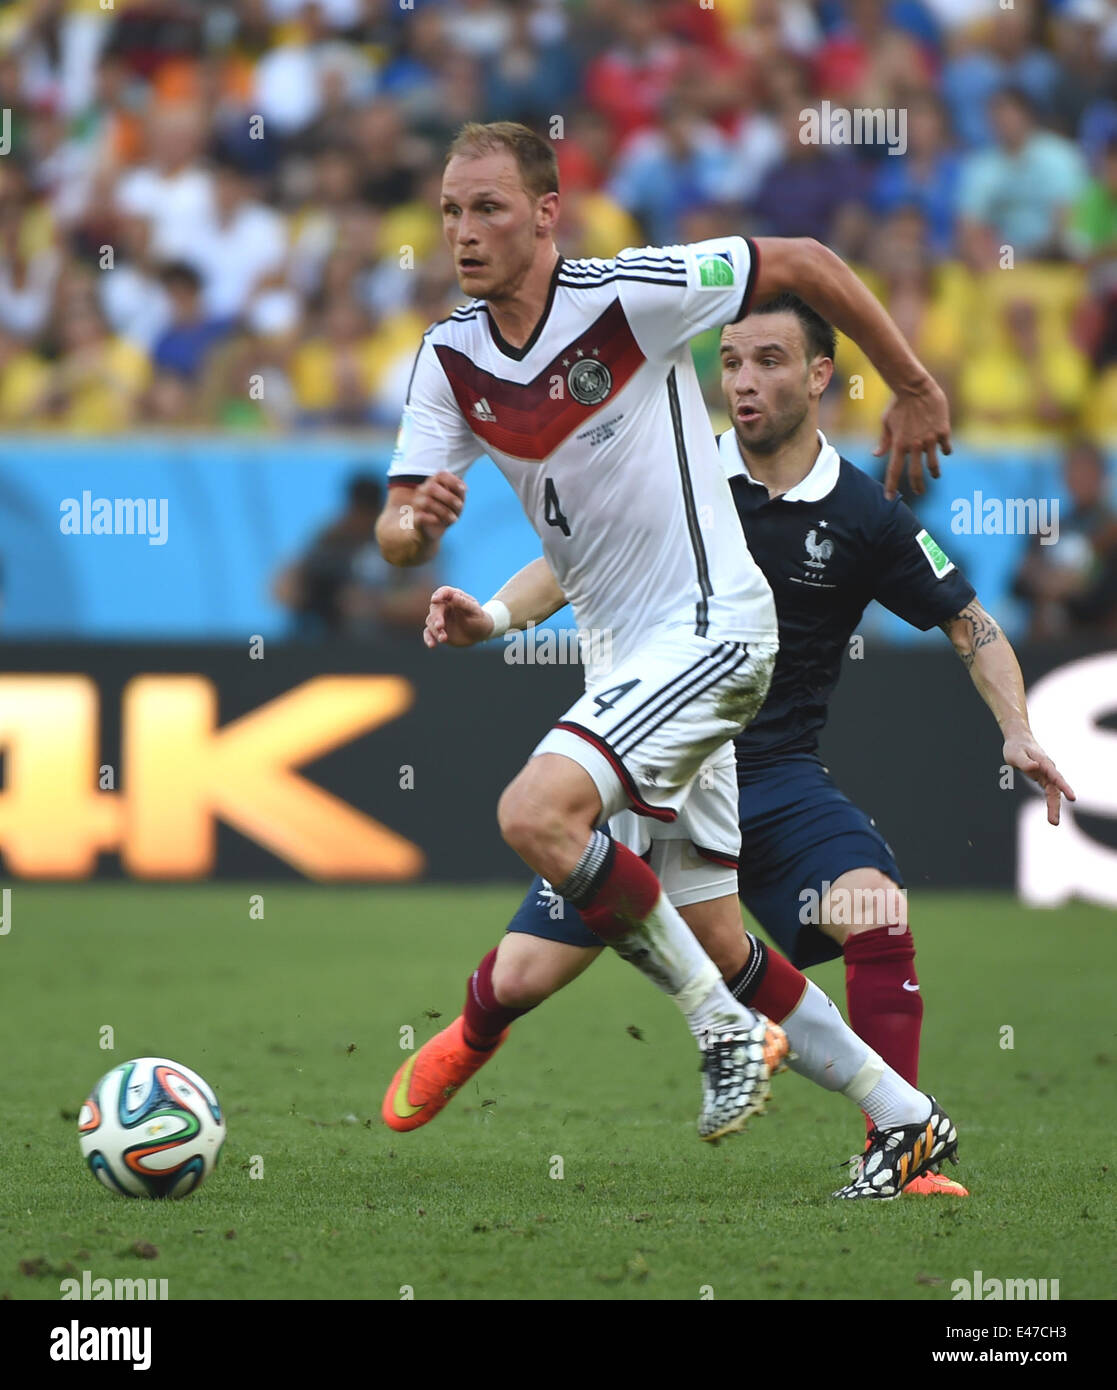 Rio De Janeiro, Brazil. 4th July, 2014. Germany's Benedikt Howedes runs with the ball during a quarter-finals match between France and Germany of 2014 FIFA World Cup at the Estadio do Maracana Stadium in Rio de Janeiro, Brazil, on July 4, 2014. Credit:  Wang Yuguo/Xinhua/Alamy Live News Stock Photo